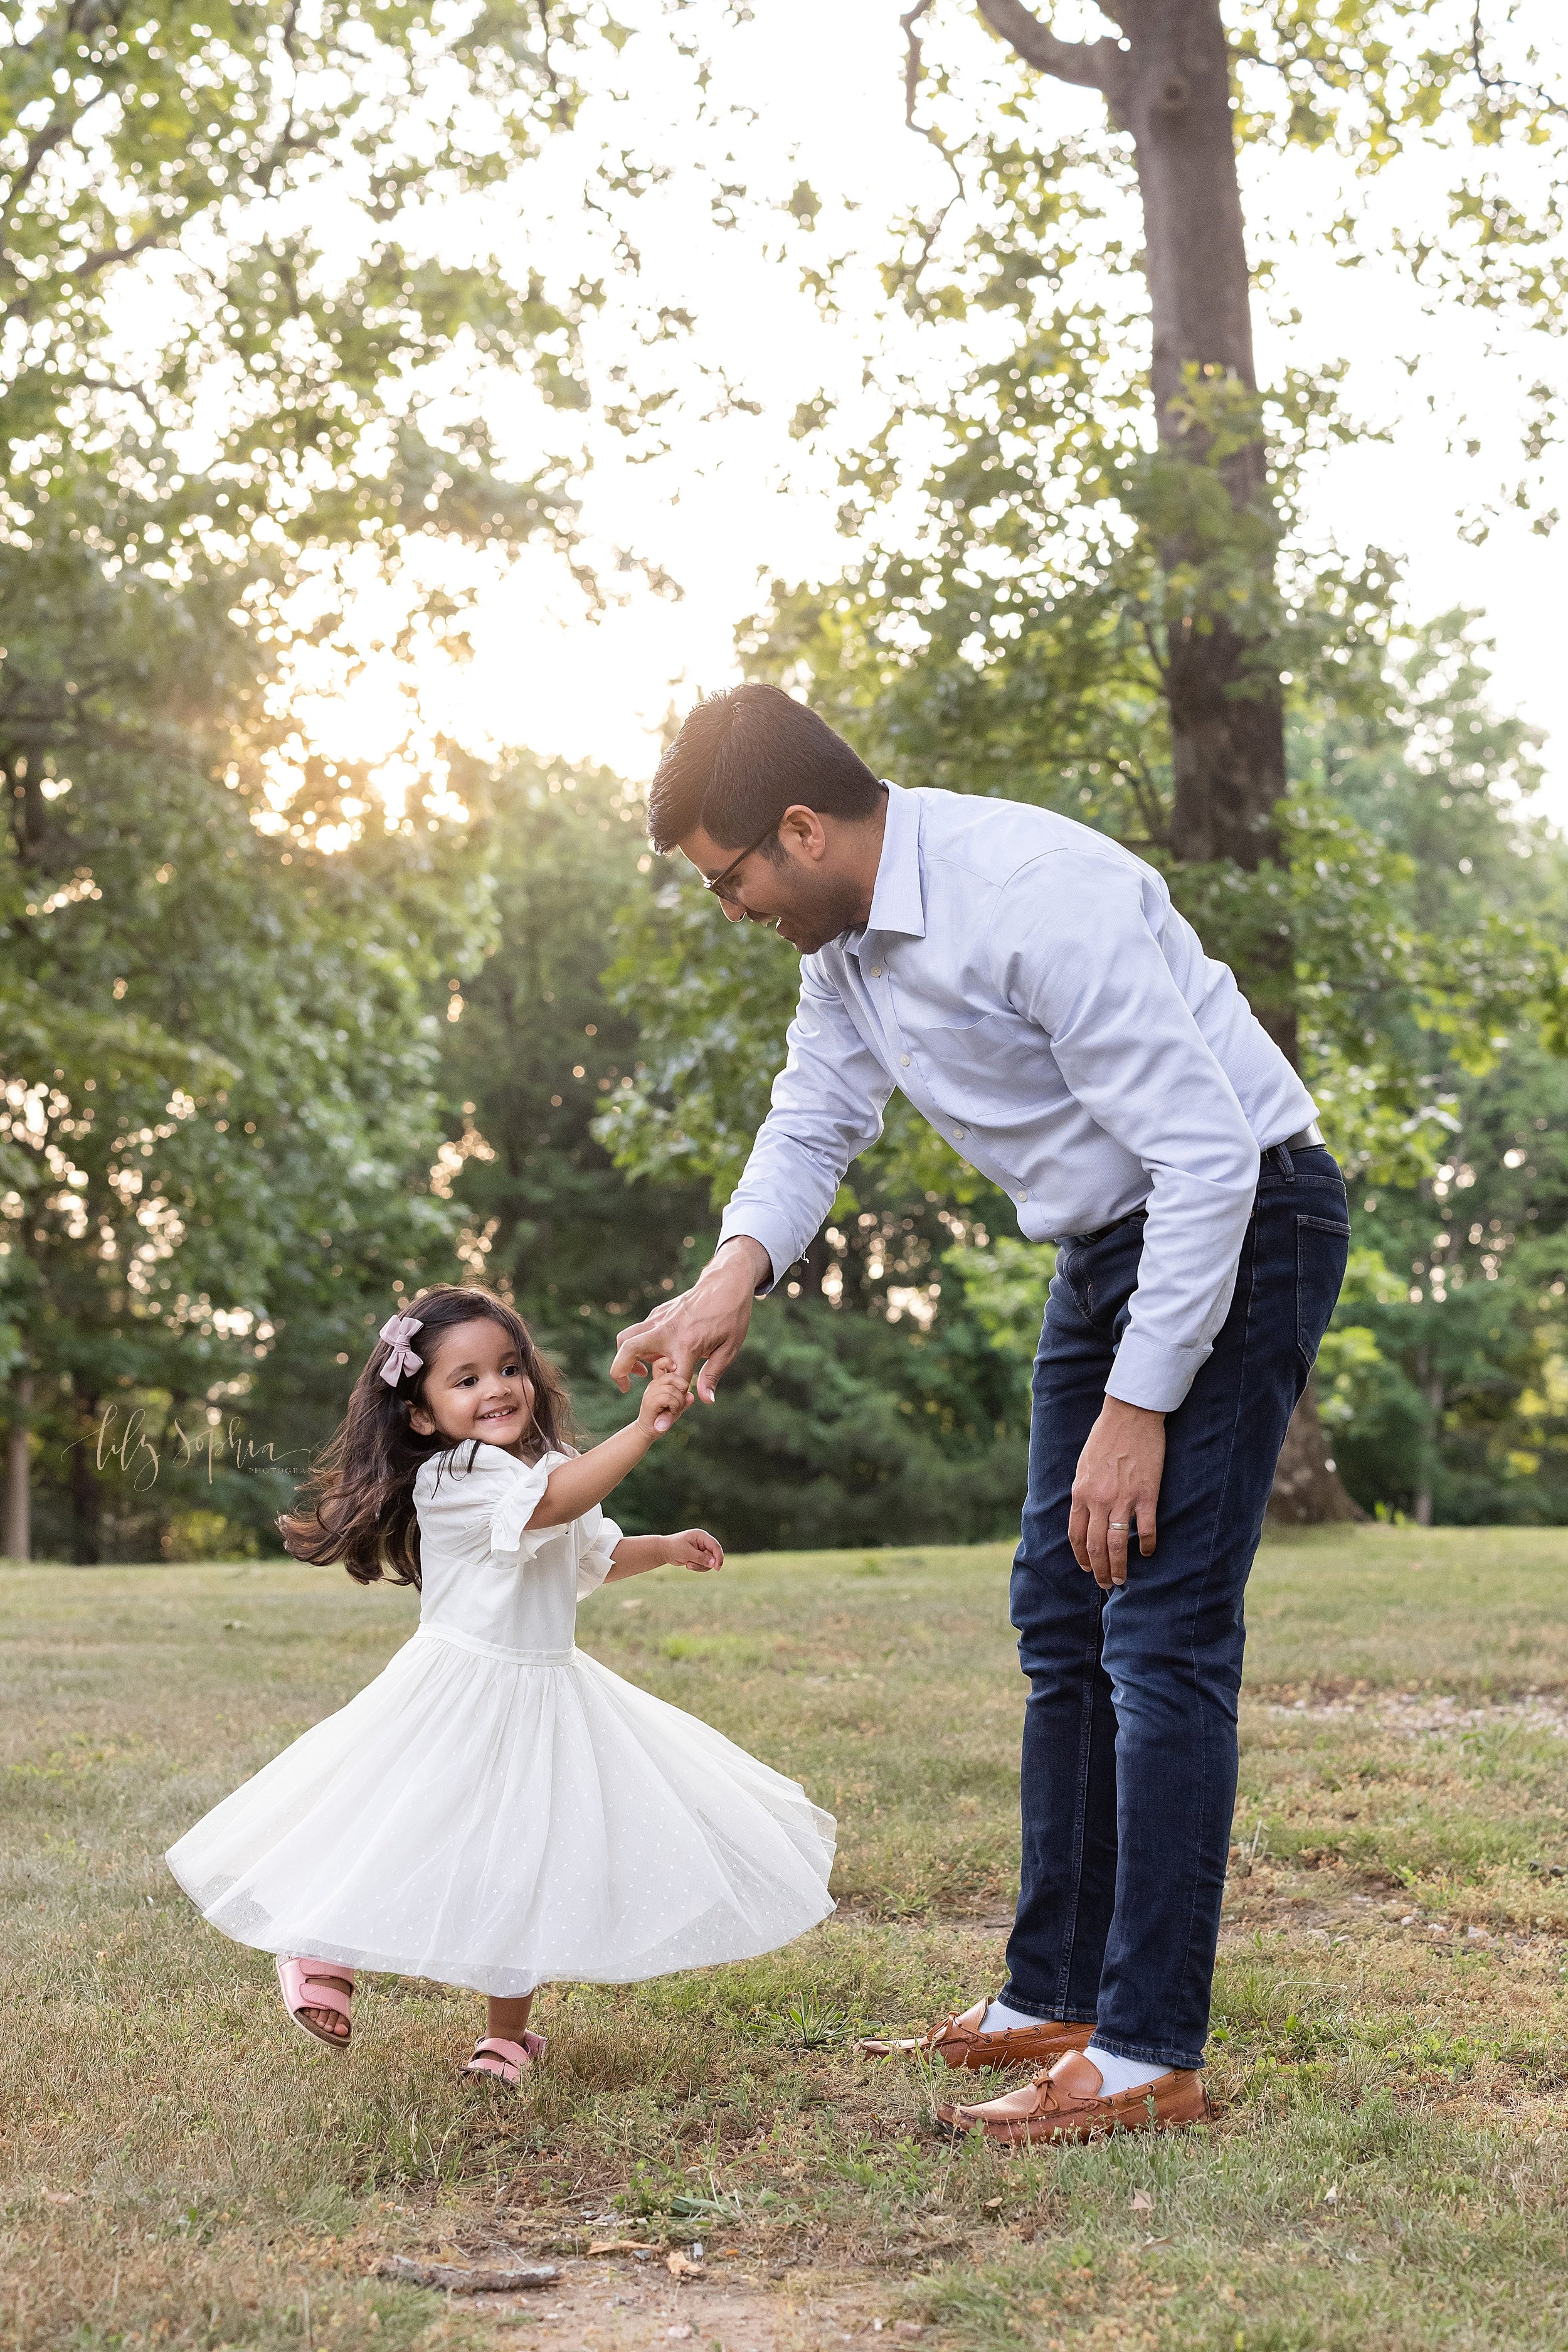  Family photo session of an Indian father dancing with his daughter at sunset in a park near Atlanta, Georgia. 